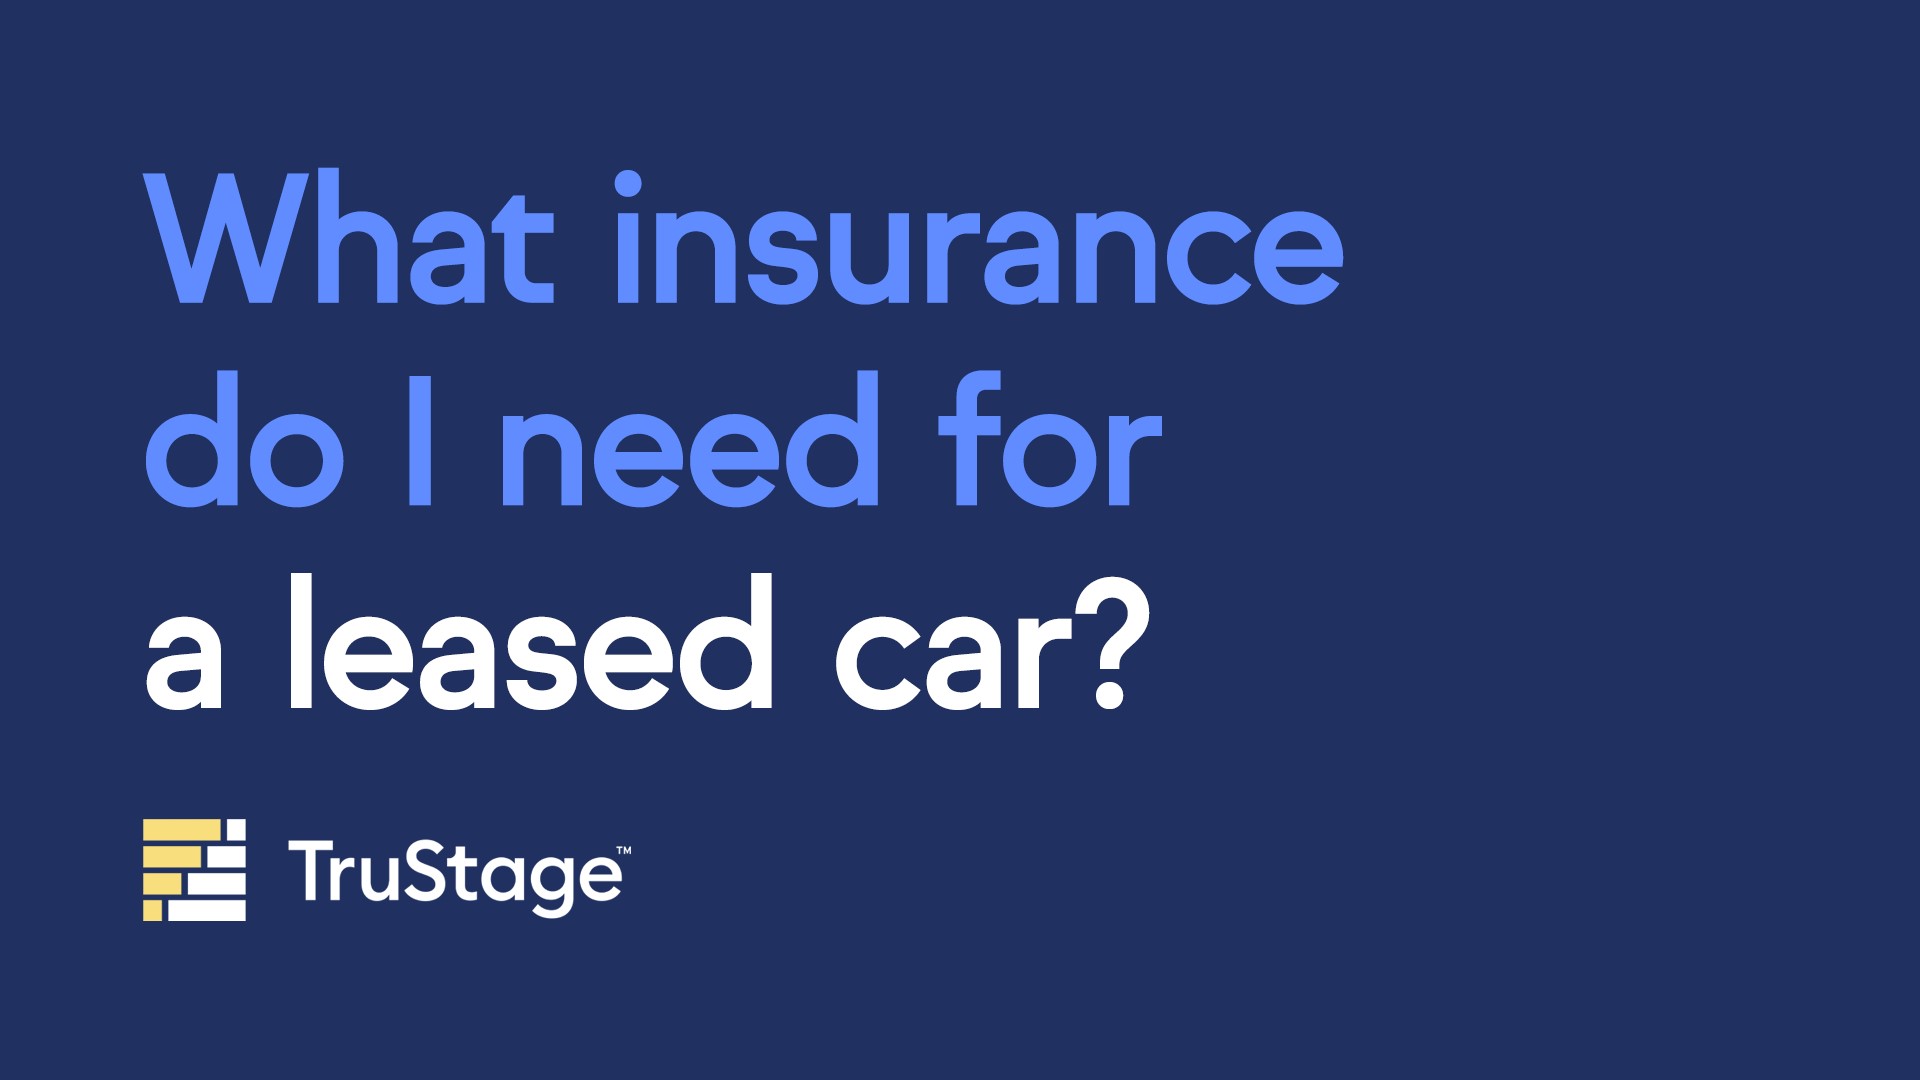 What insurance do I need for a leased car?